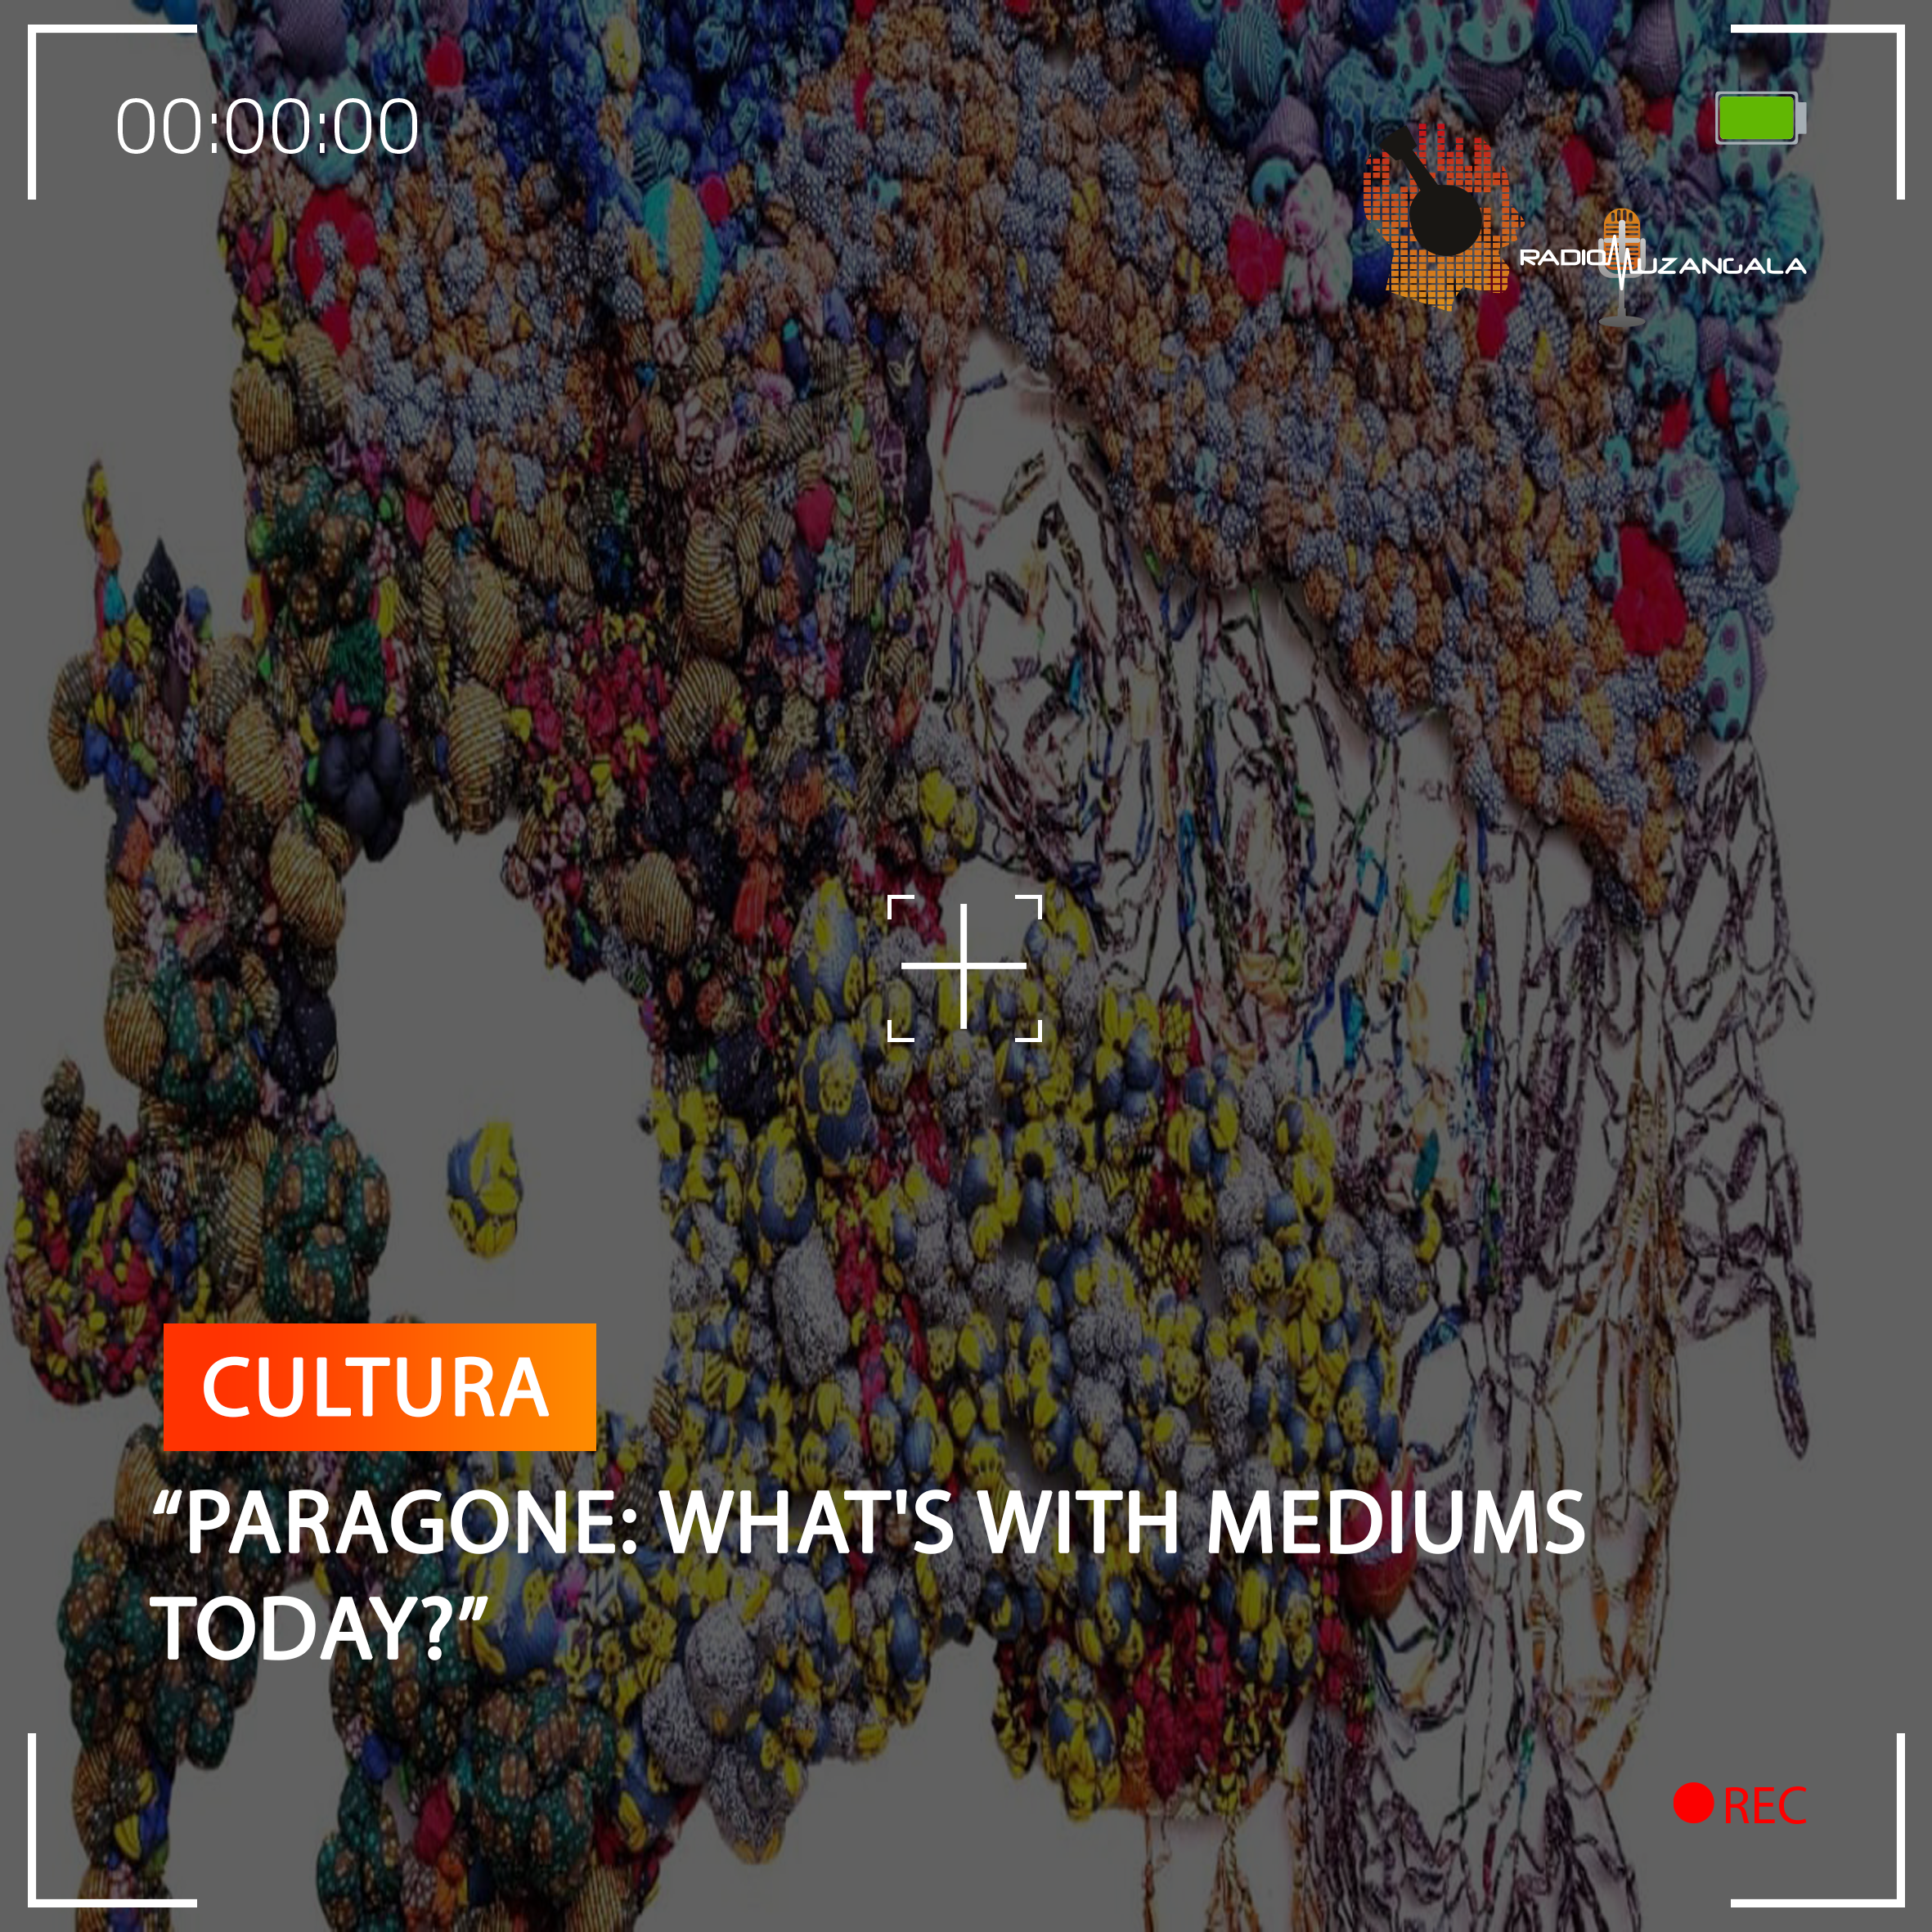  “Paragone: What’s with mediums today?”